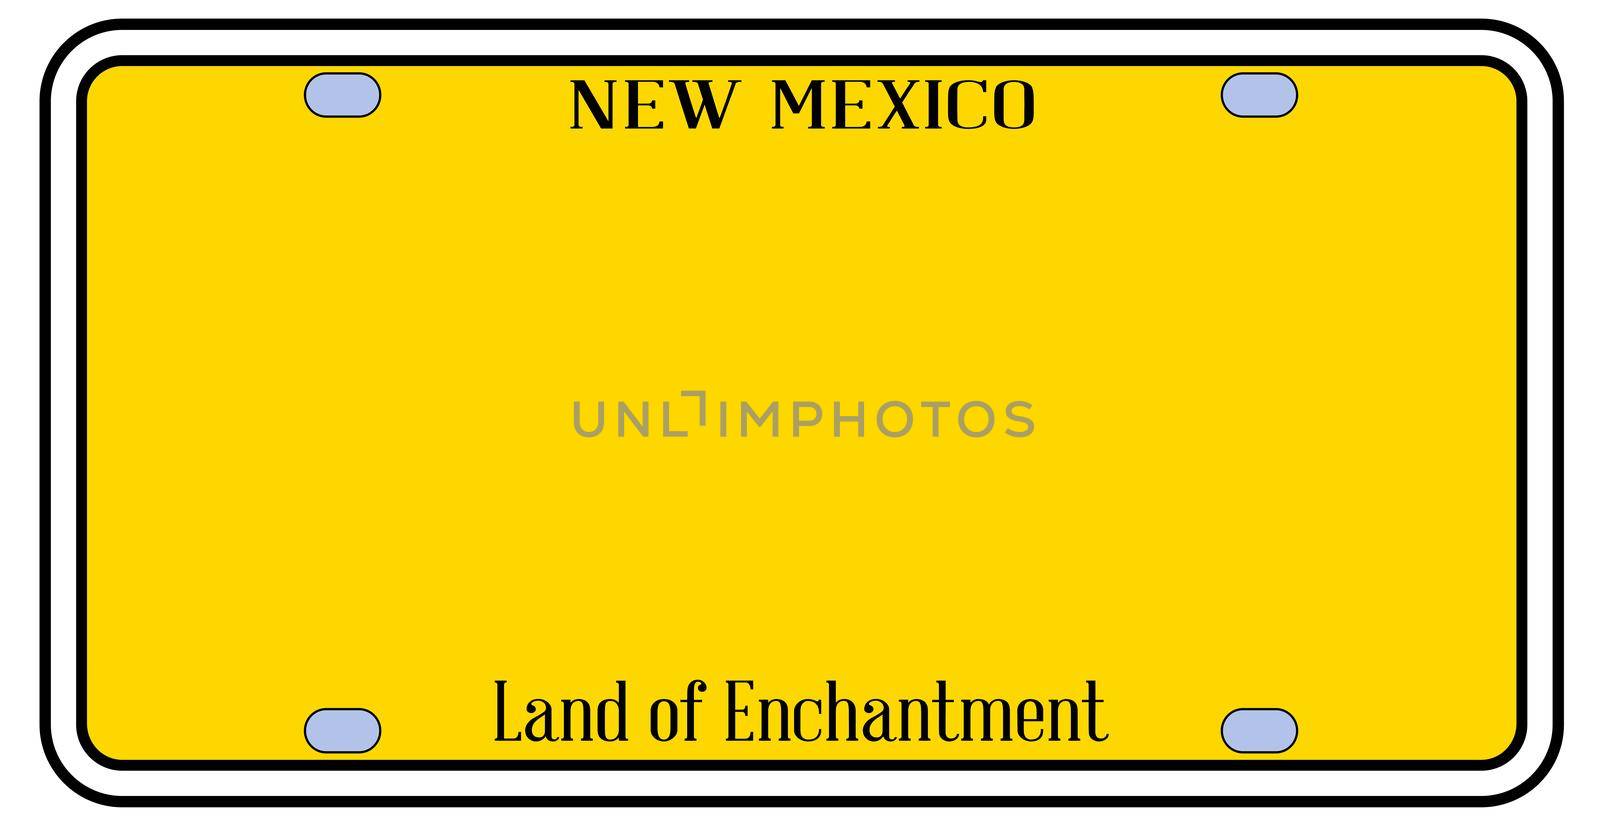 New Mexico state license plate in the colors of the state flag over a white background